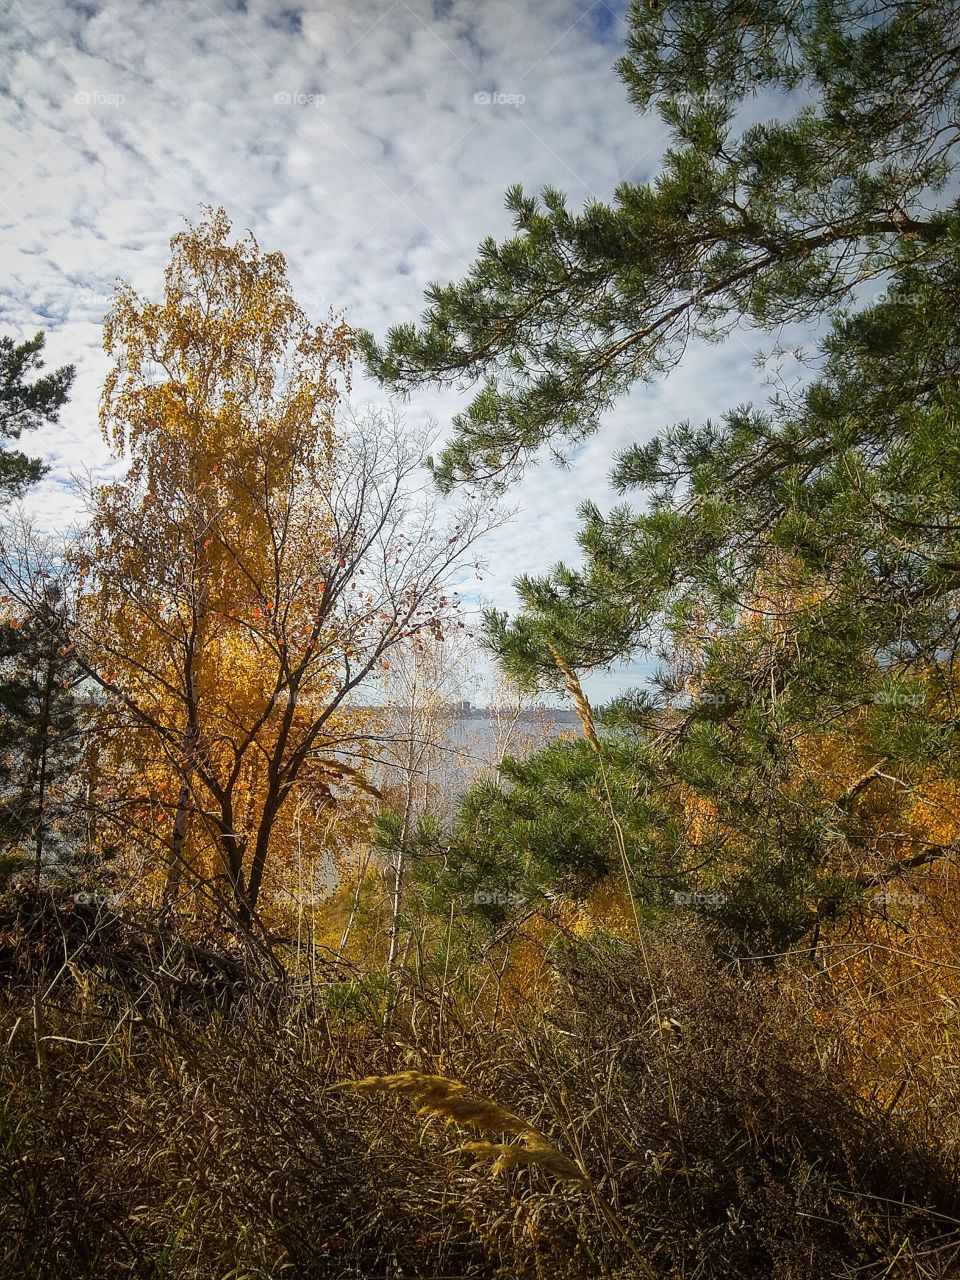 Thickets, bushes and trees covered with yellowing leaves against the background of the Volga River (Russia) and the city of Ulyanovsk and its buildings located on the opposite bank of the river, under a cloudy blue sky on an autumn sunny day